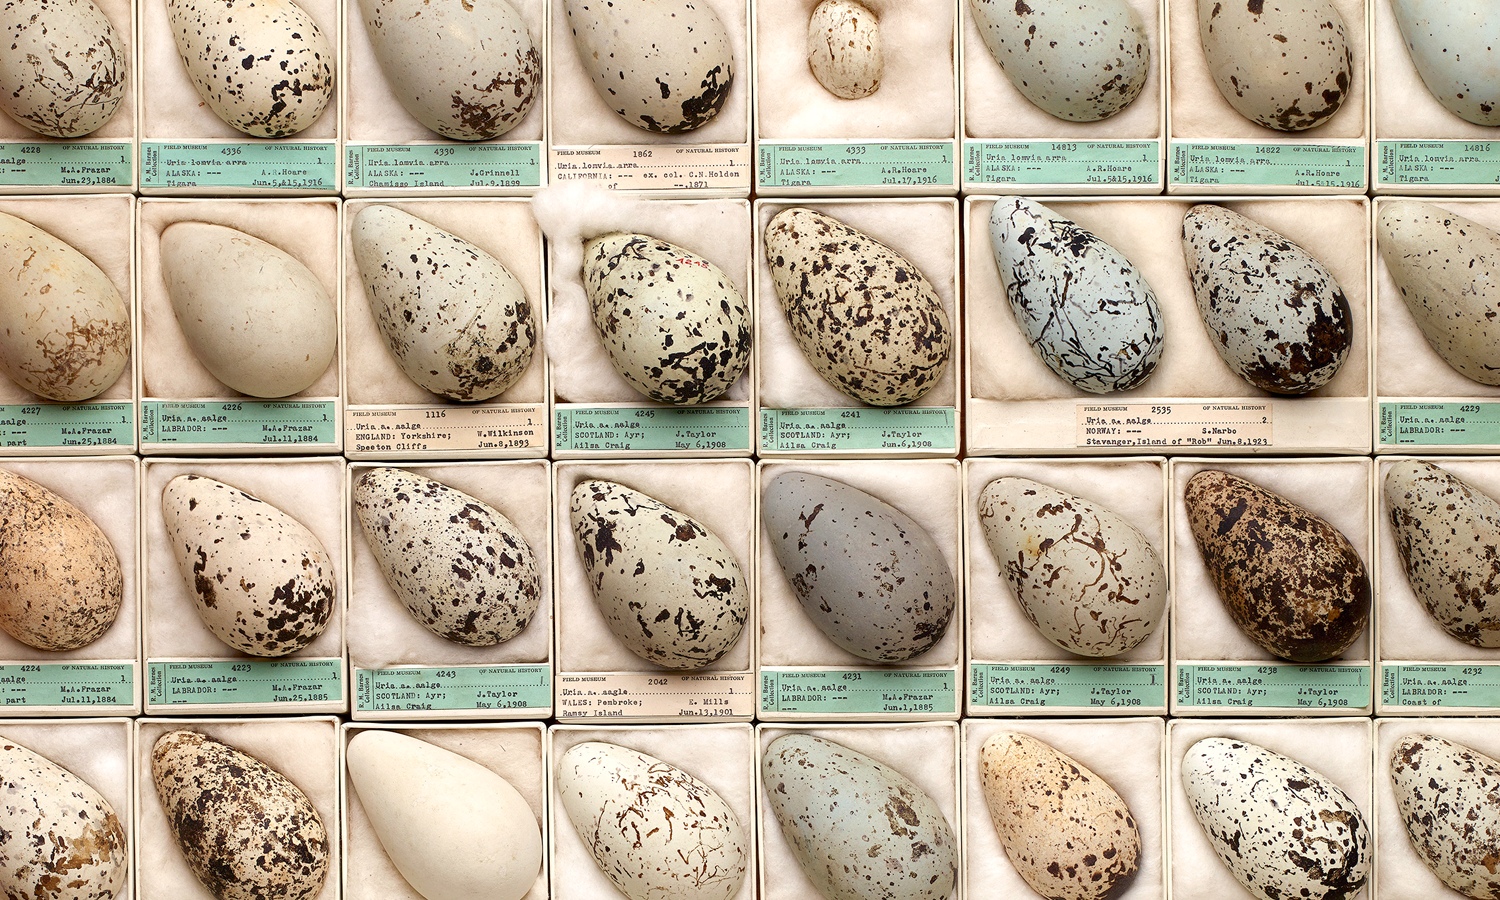 Eggs from The Field Museum's collection, each in its own tray, aligned in rows.